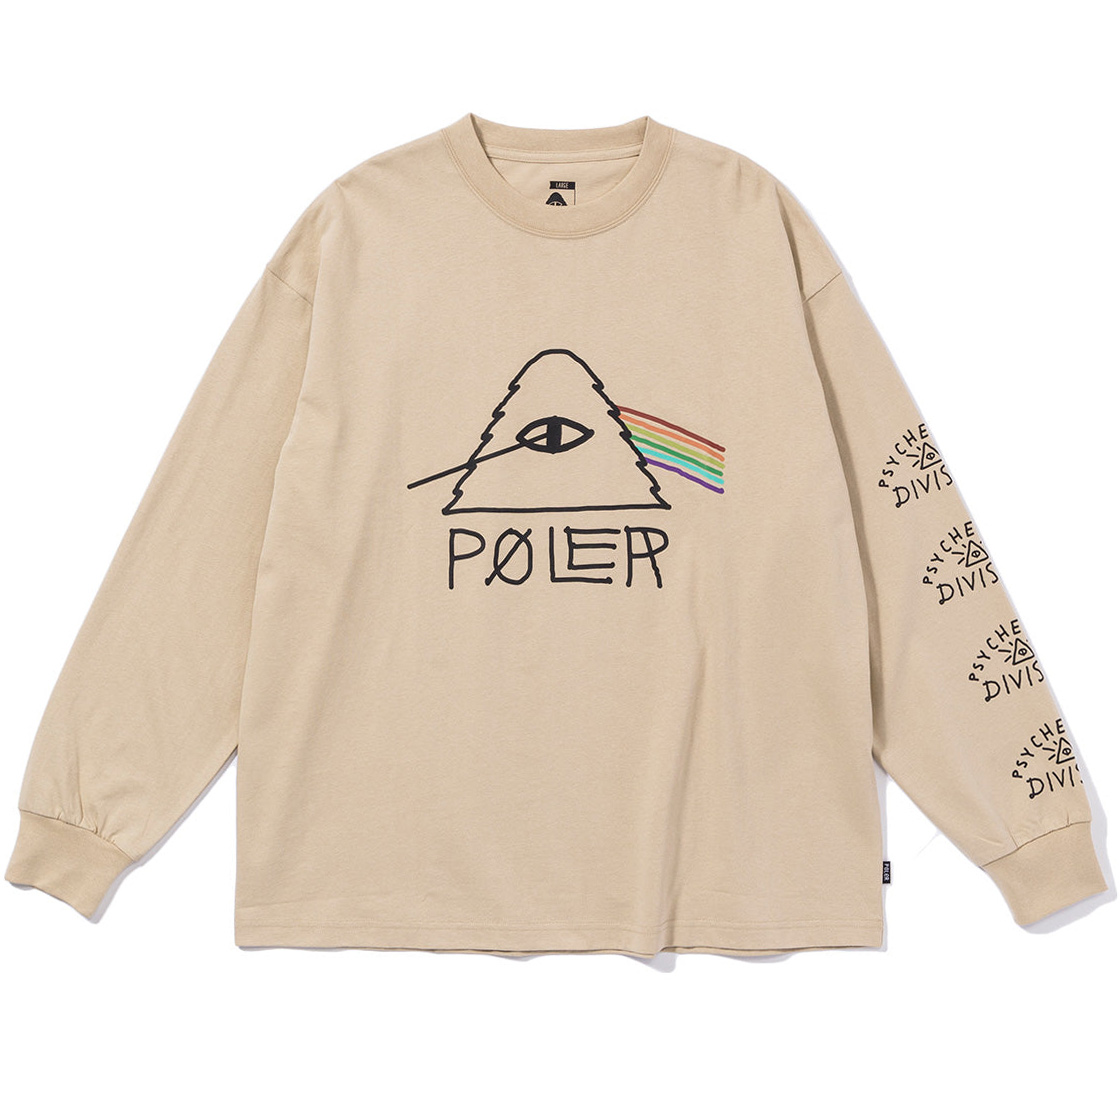 POLeR ポーラー PSYCHEDELIC RELAX FIT L/S TEE 長袖 Tシャツ ロ...